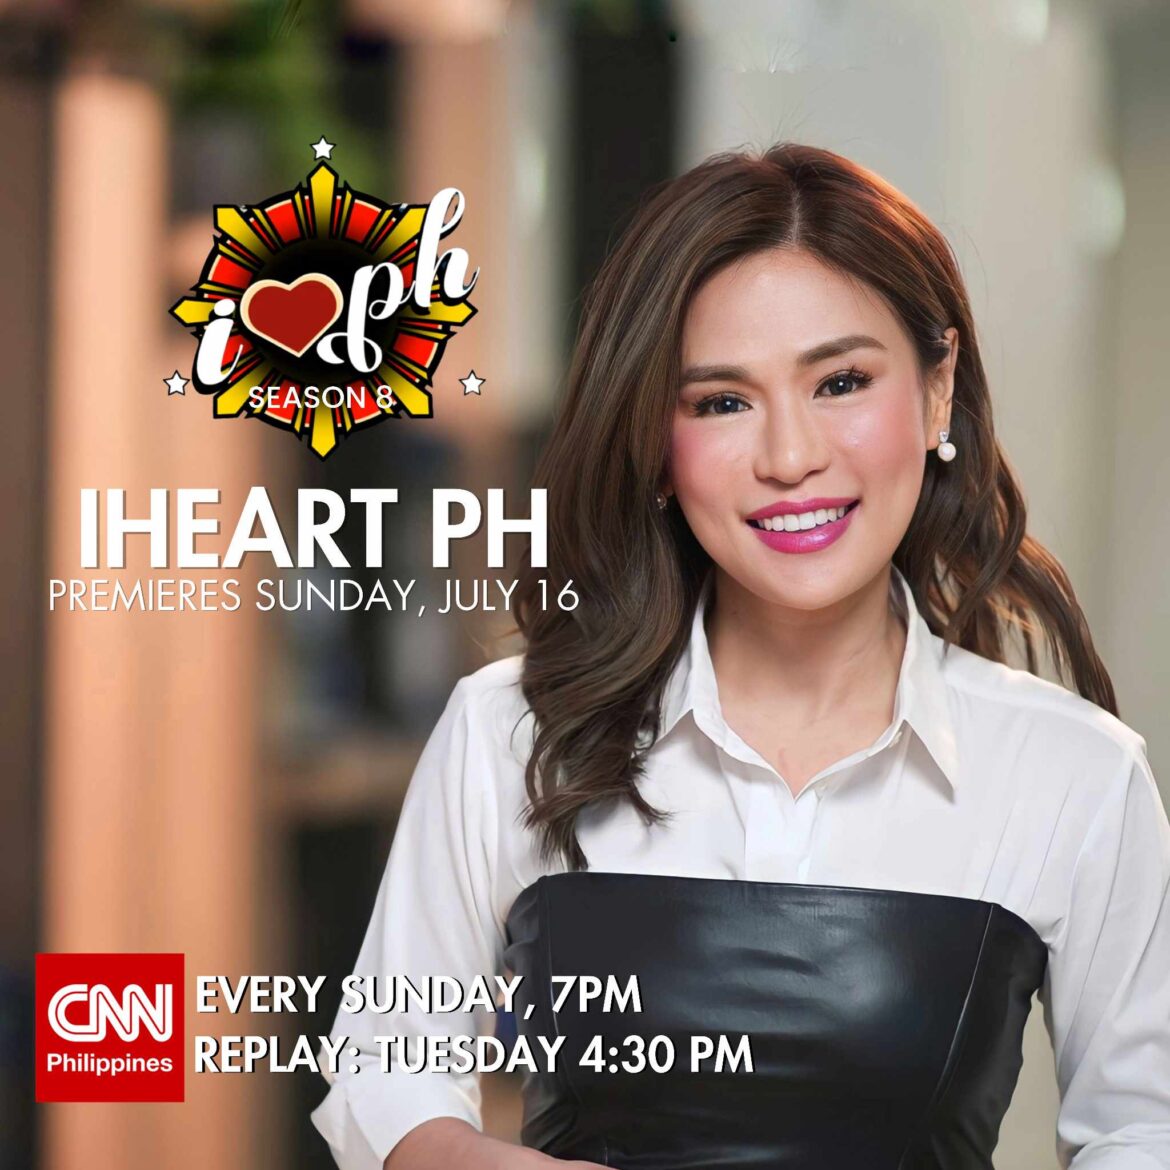 IHeartPH remains in the heart of every Filipino – Season 8 to premiere in CNN Philippines this July 16